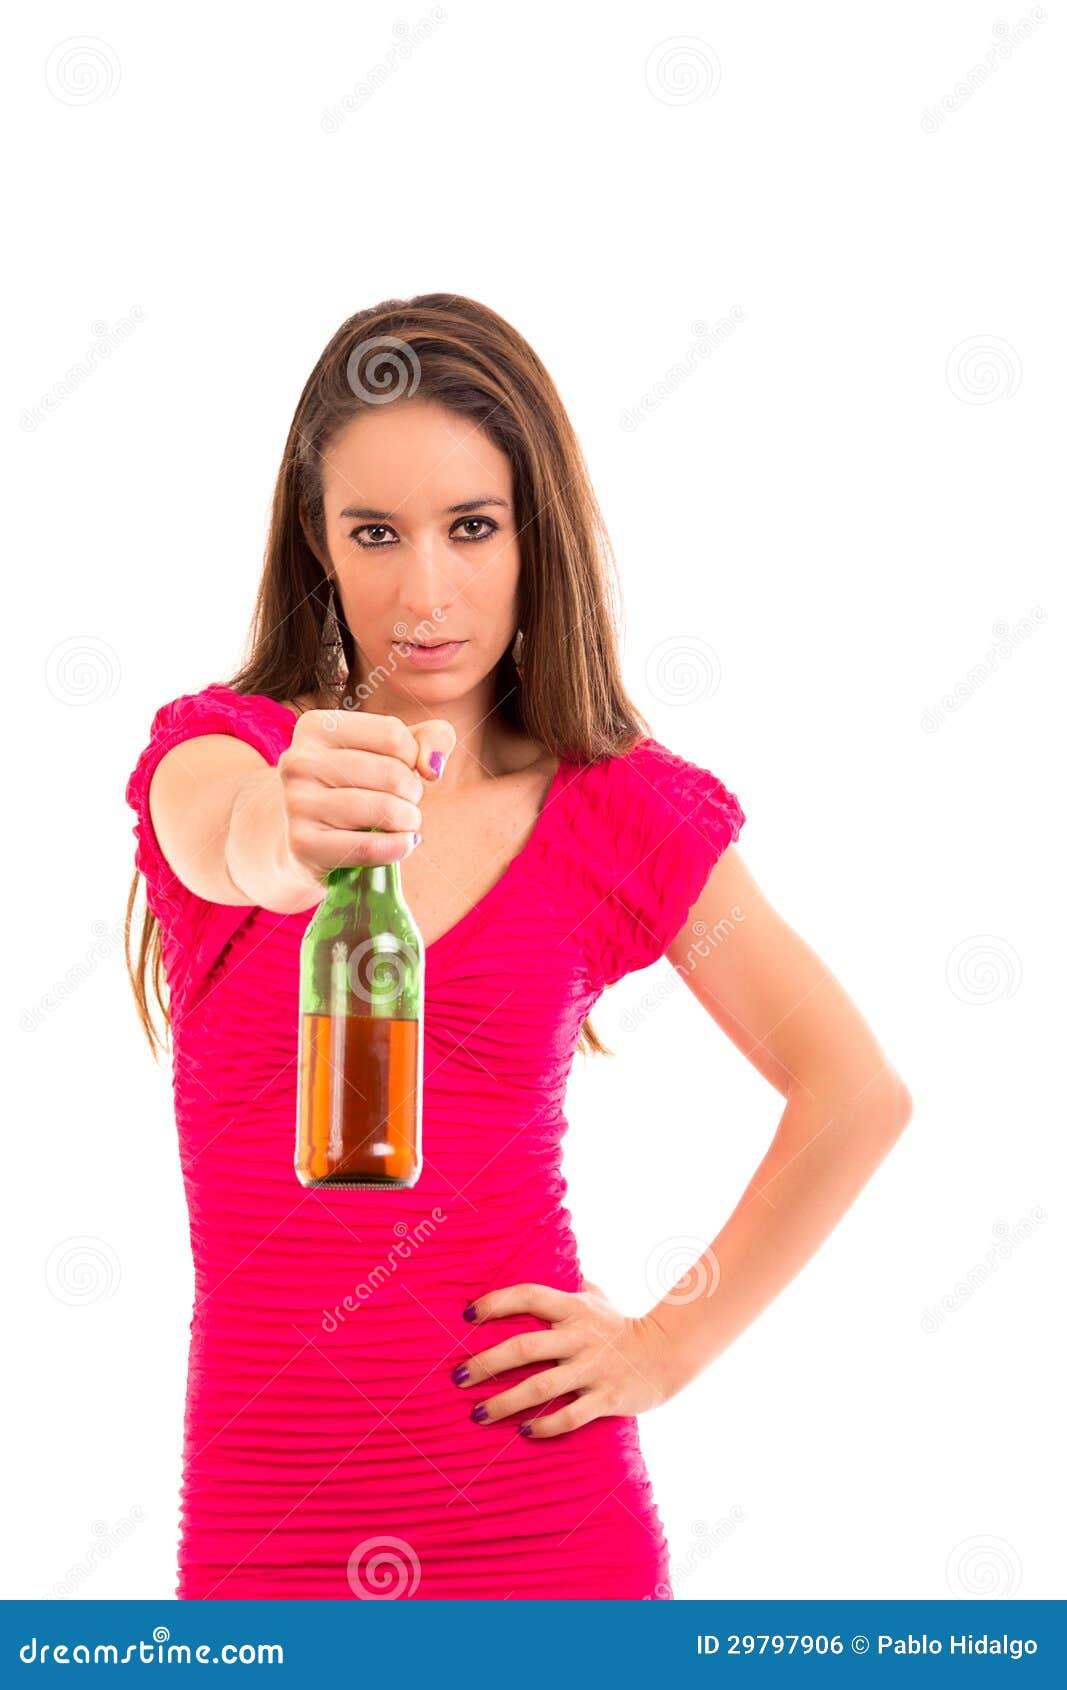 Woman Drinking Beer Royalty Free Stock Image - Image: 29797906